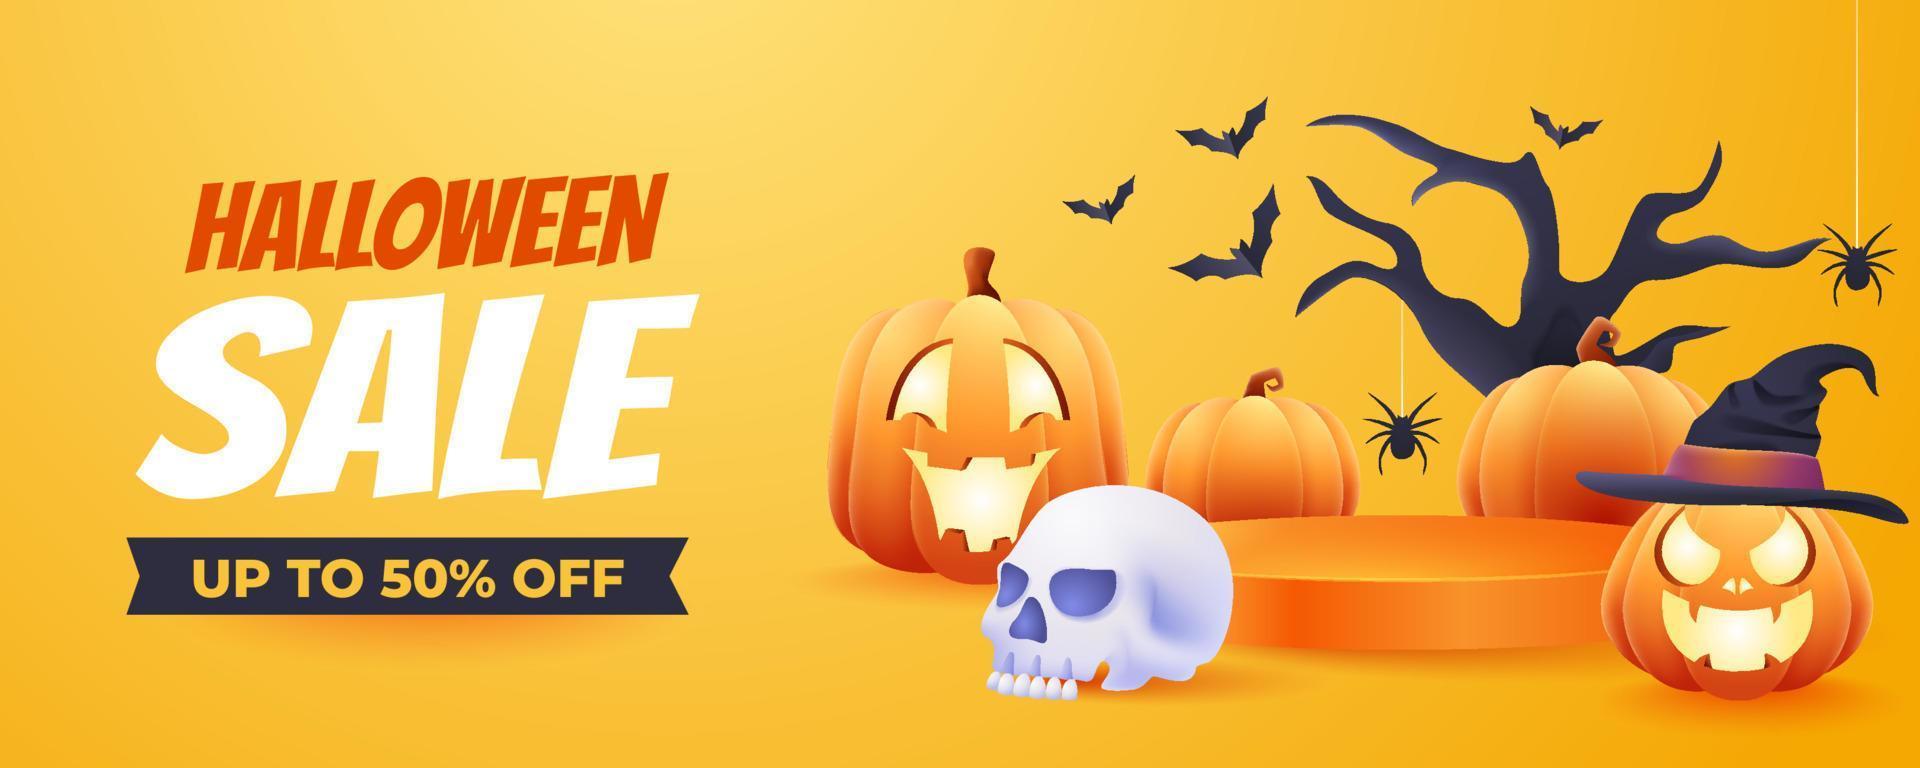 3d Halloween Super Sale Promotion Discount Banner Template with 3d podium for product sale vector